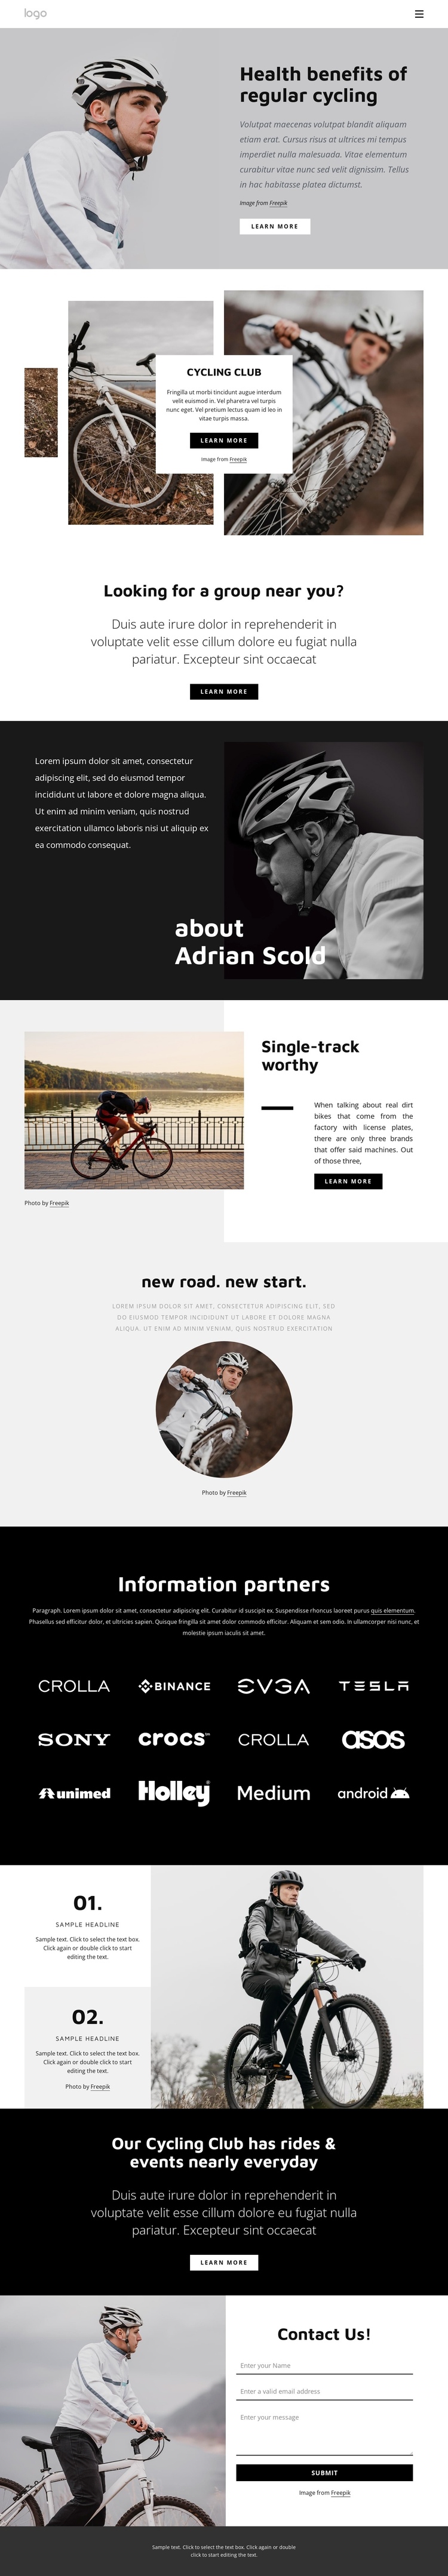 Benefits of regular cycling One Page Template